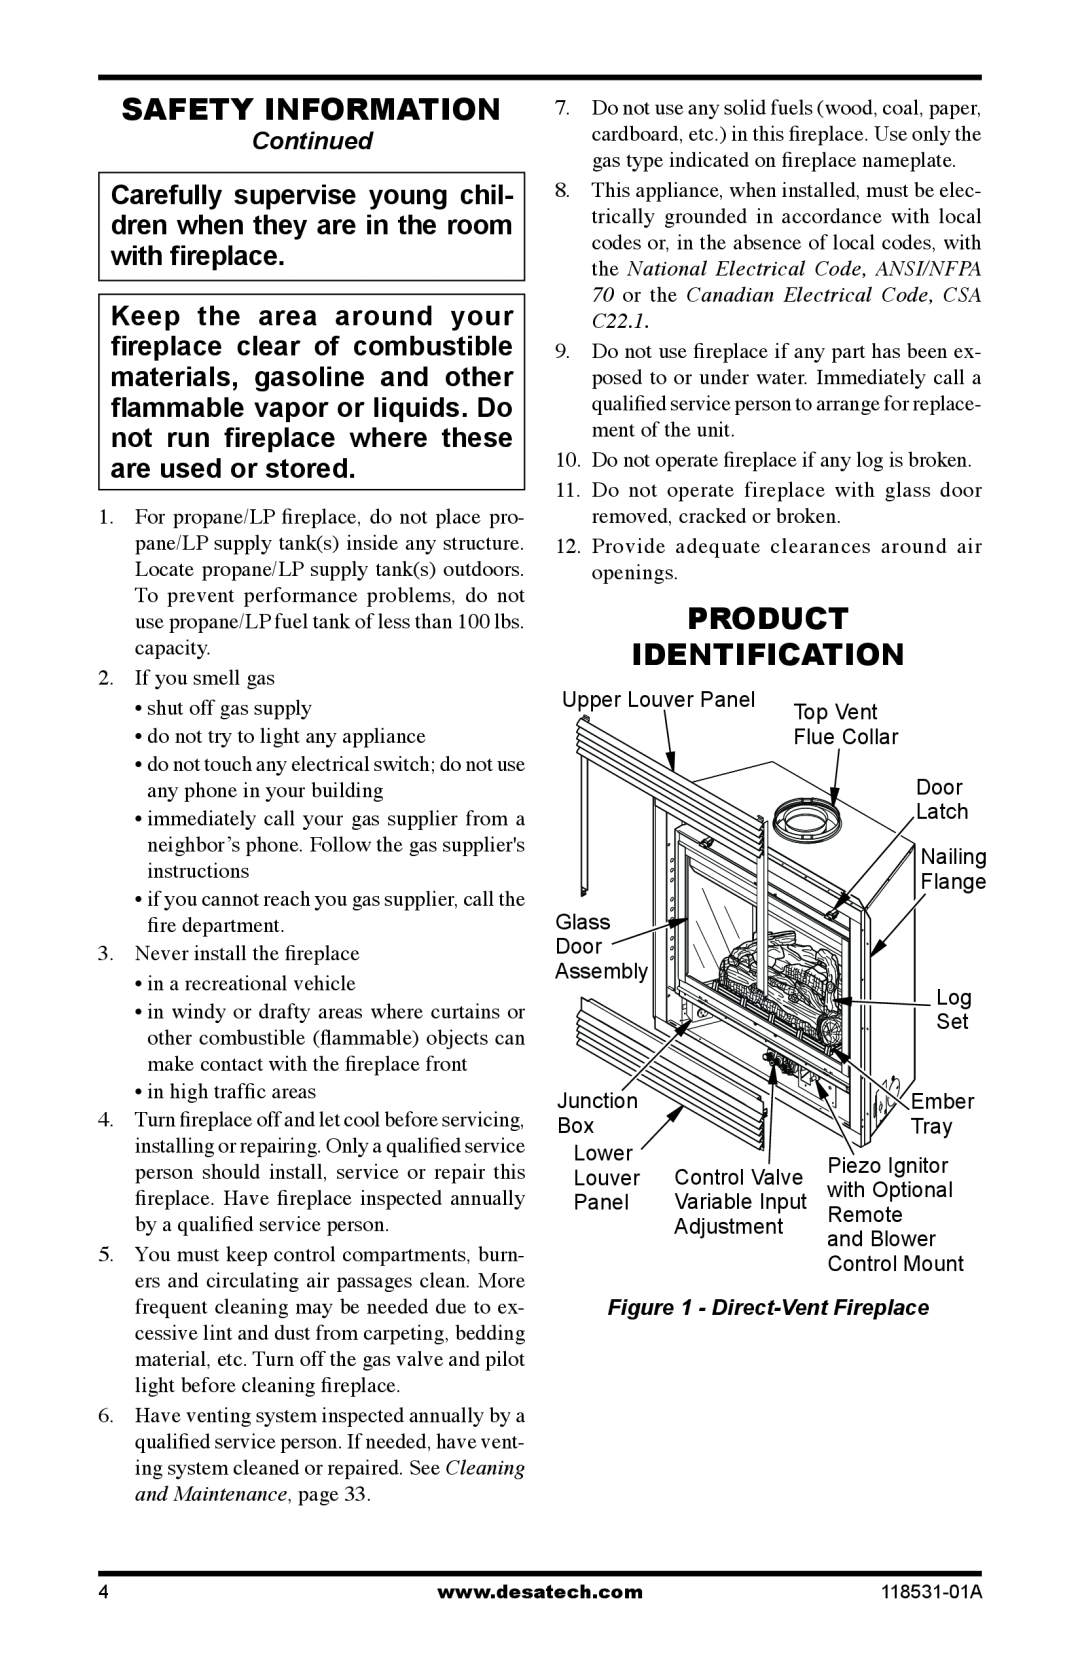 Desa CD36TN-M installation manual Safety information, Product Identification, Continued 